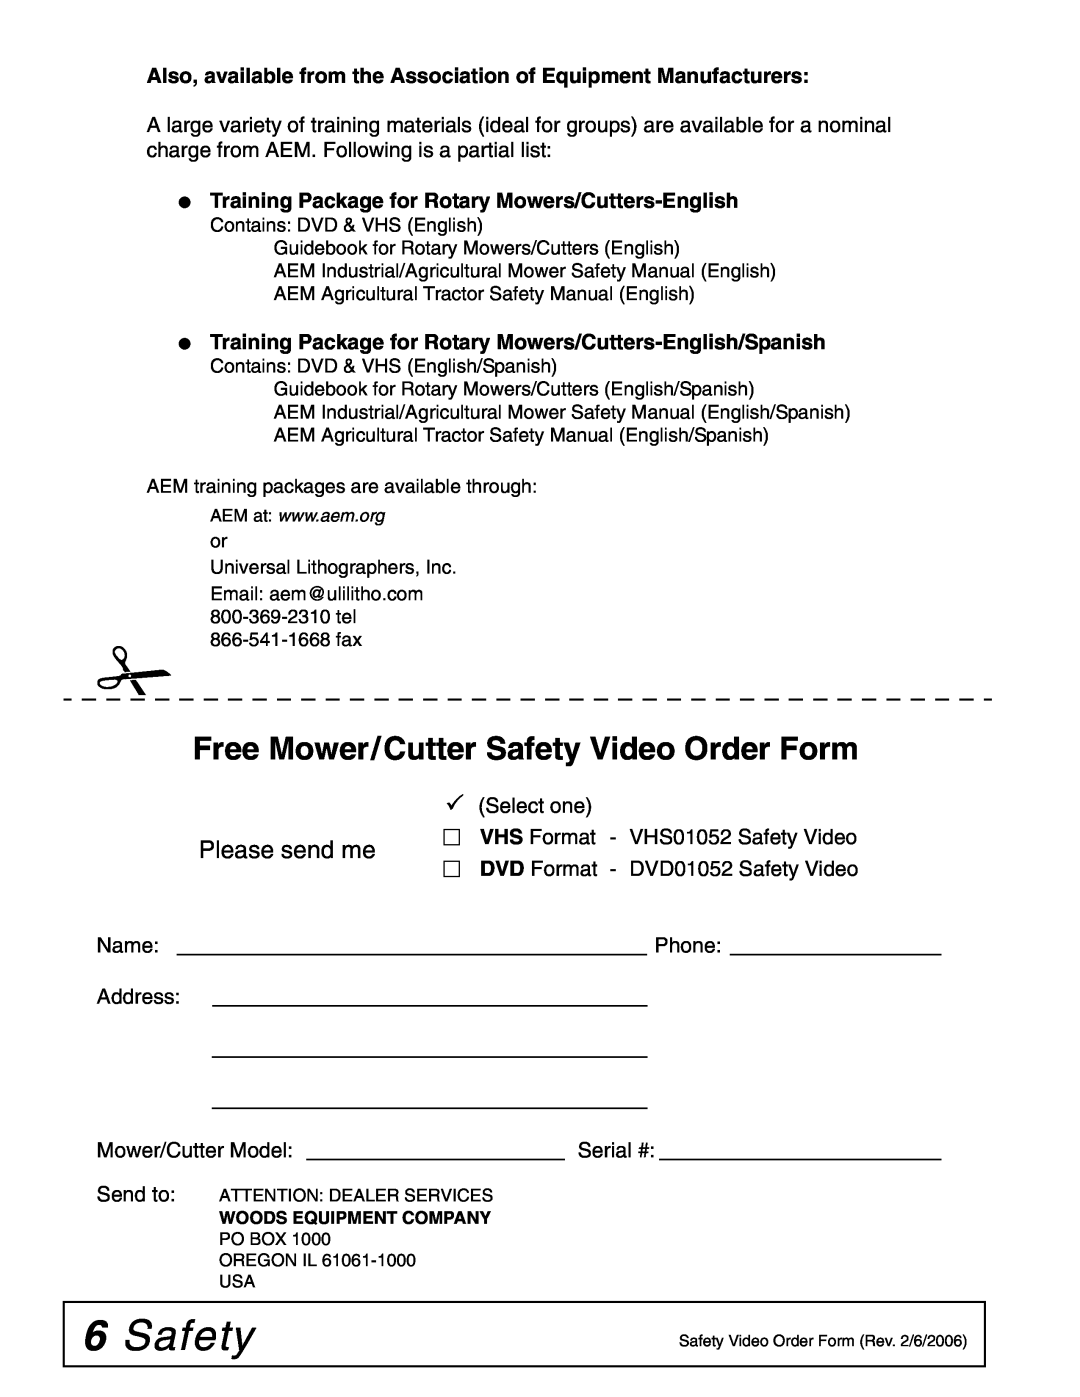 Woods Equipment BW180HBQ, BW126HBQ manual Free Mower/Cutter Safety Video Order Form, Please send me 